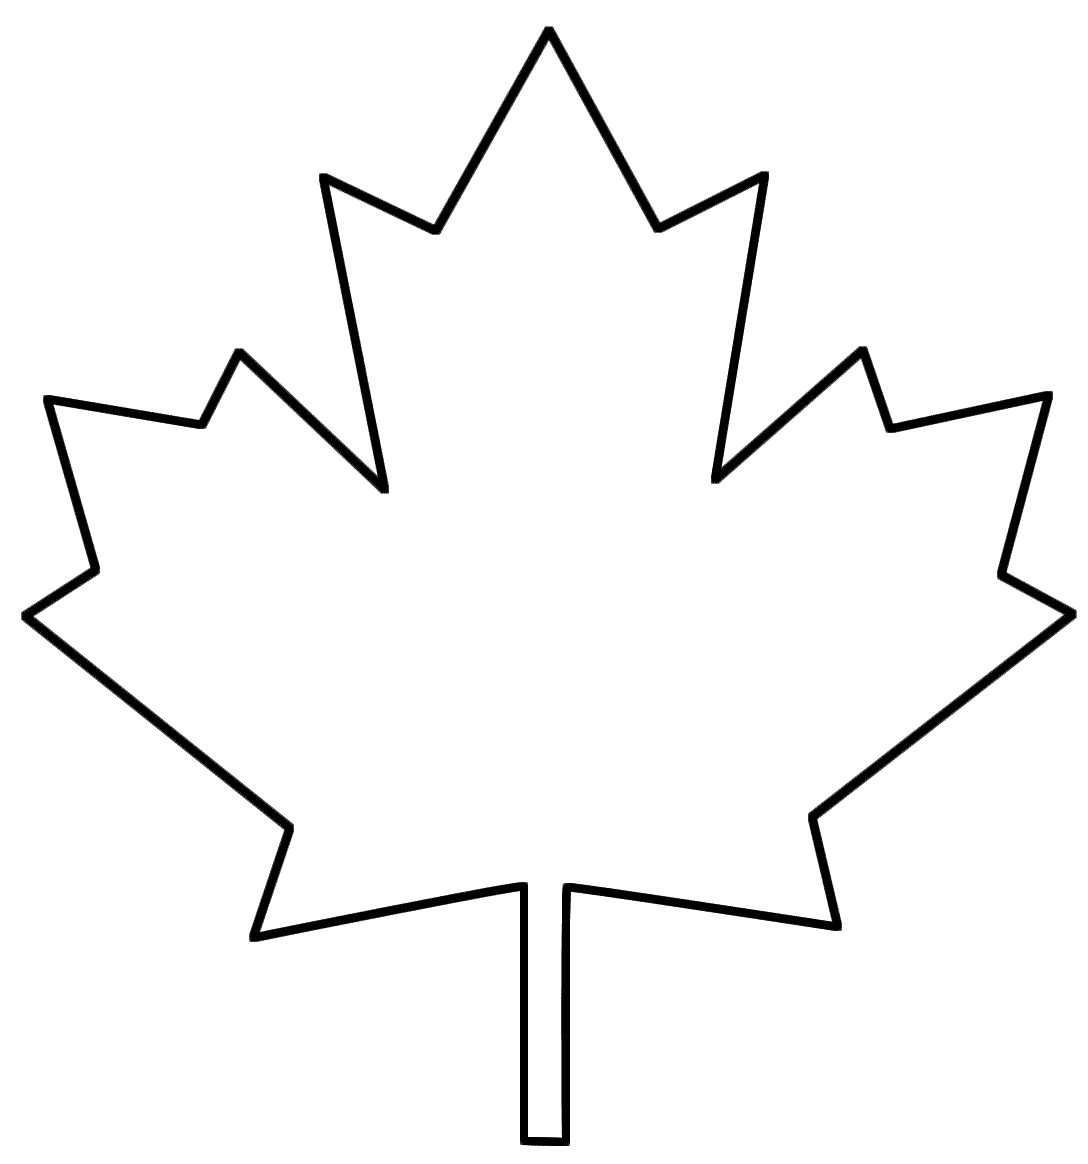 Maple Leaf Coloring Pages – Barriee